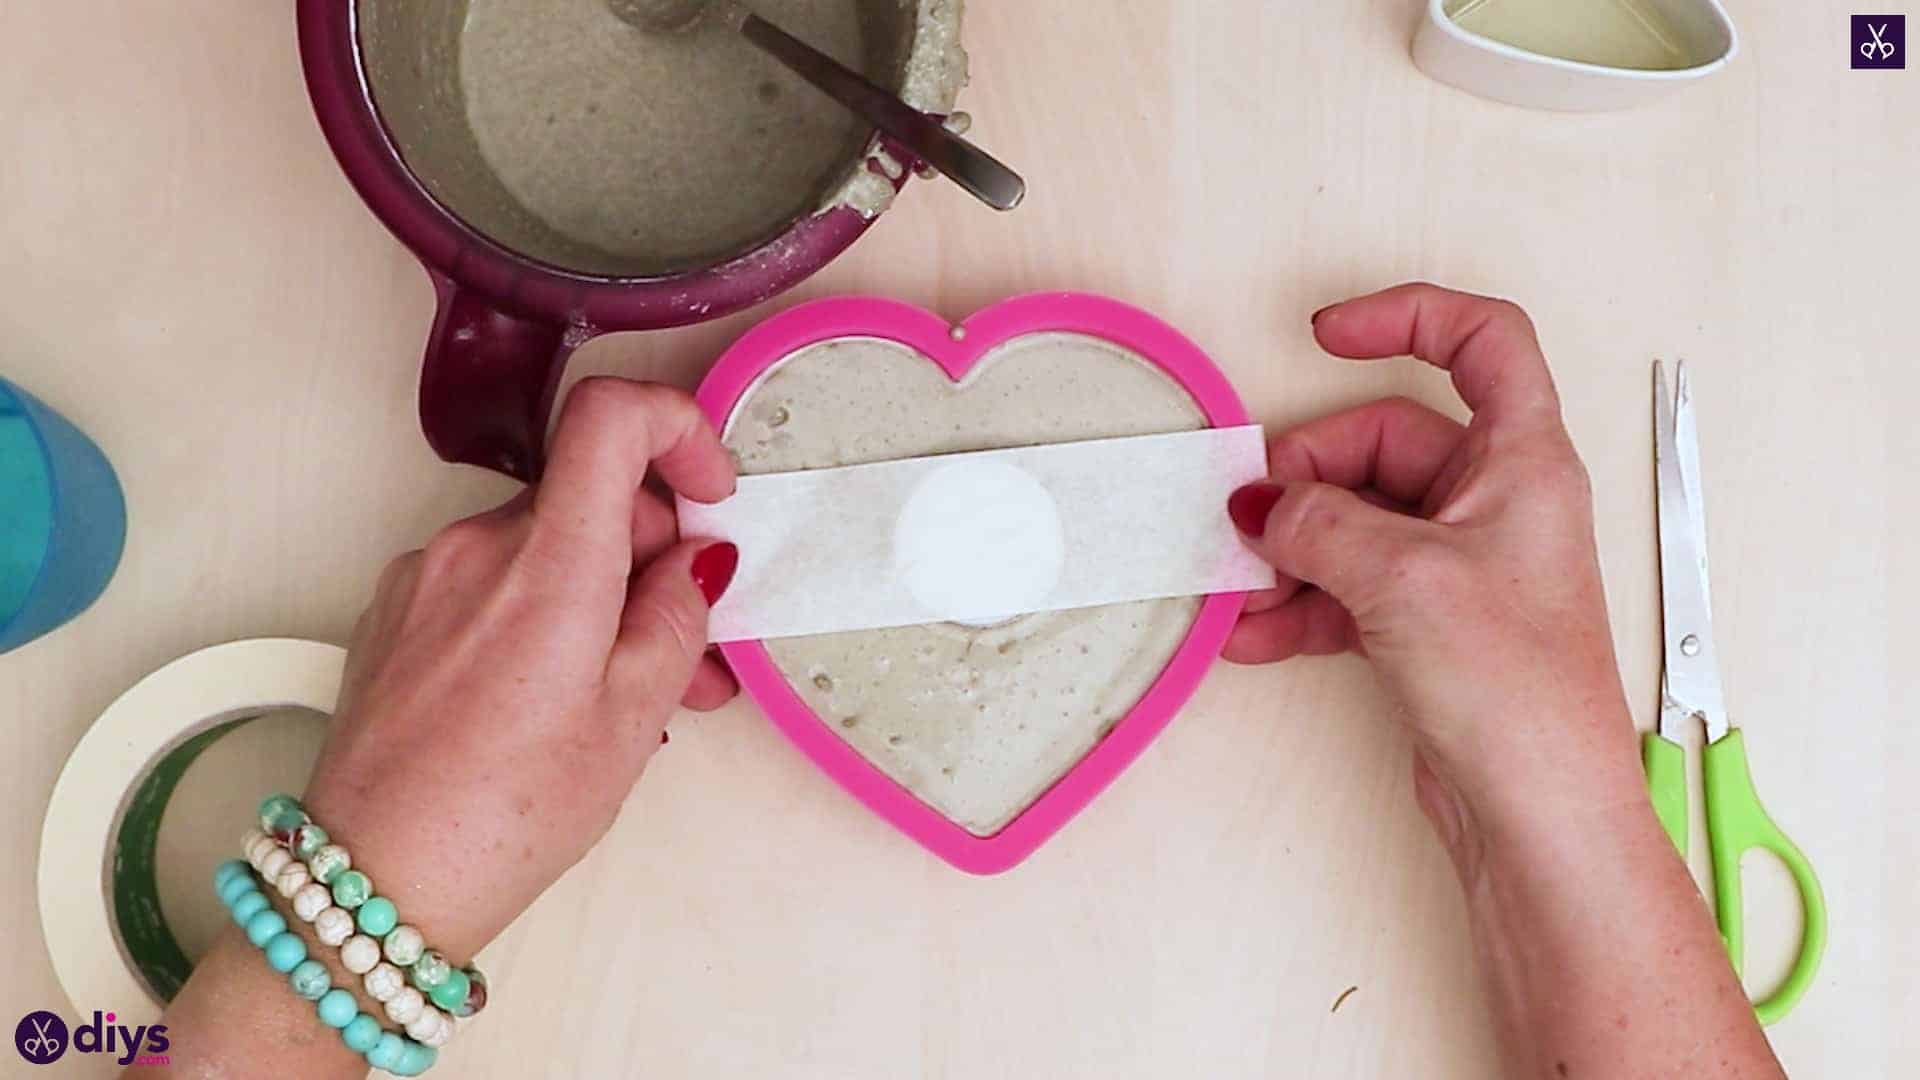 Diy concrete heart candle holder add tape